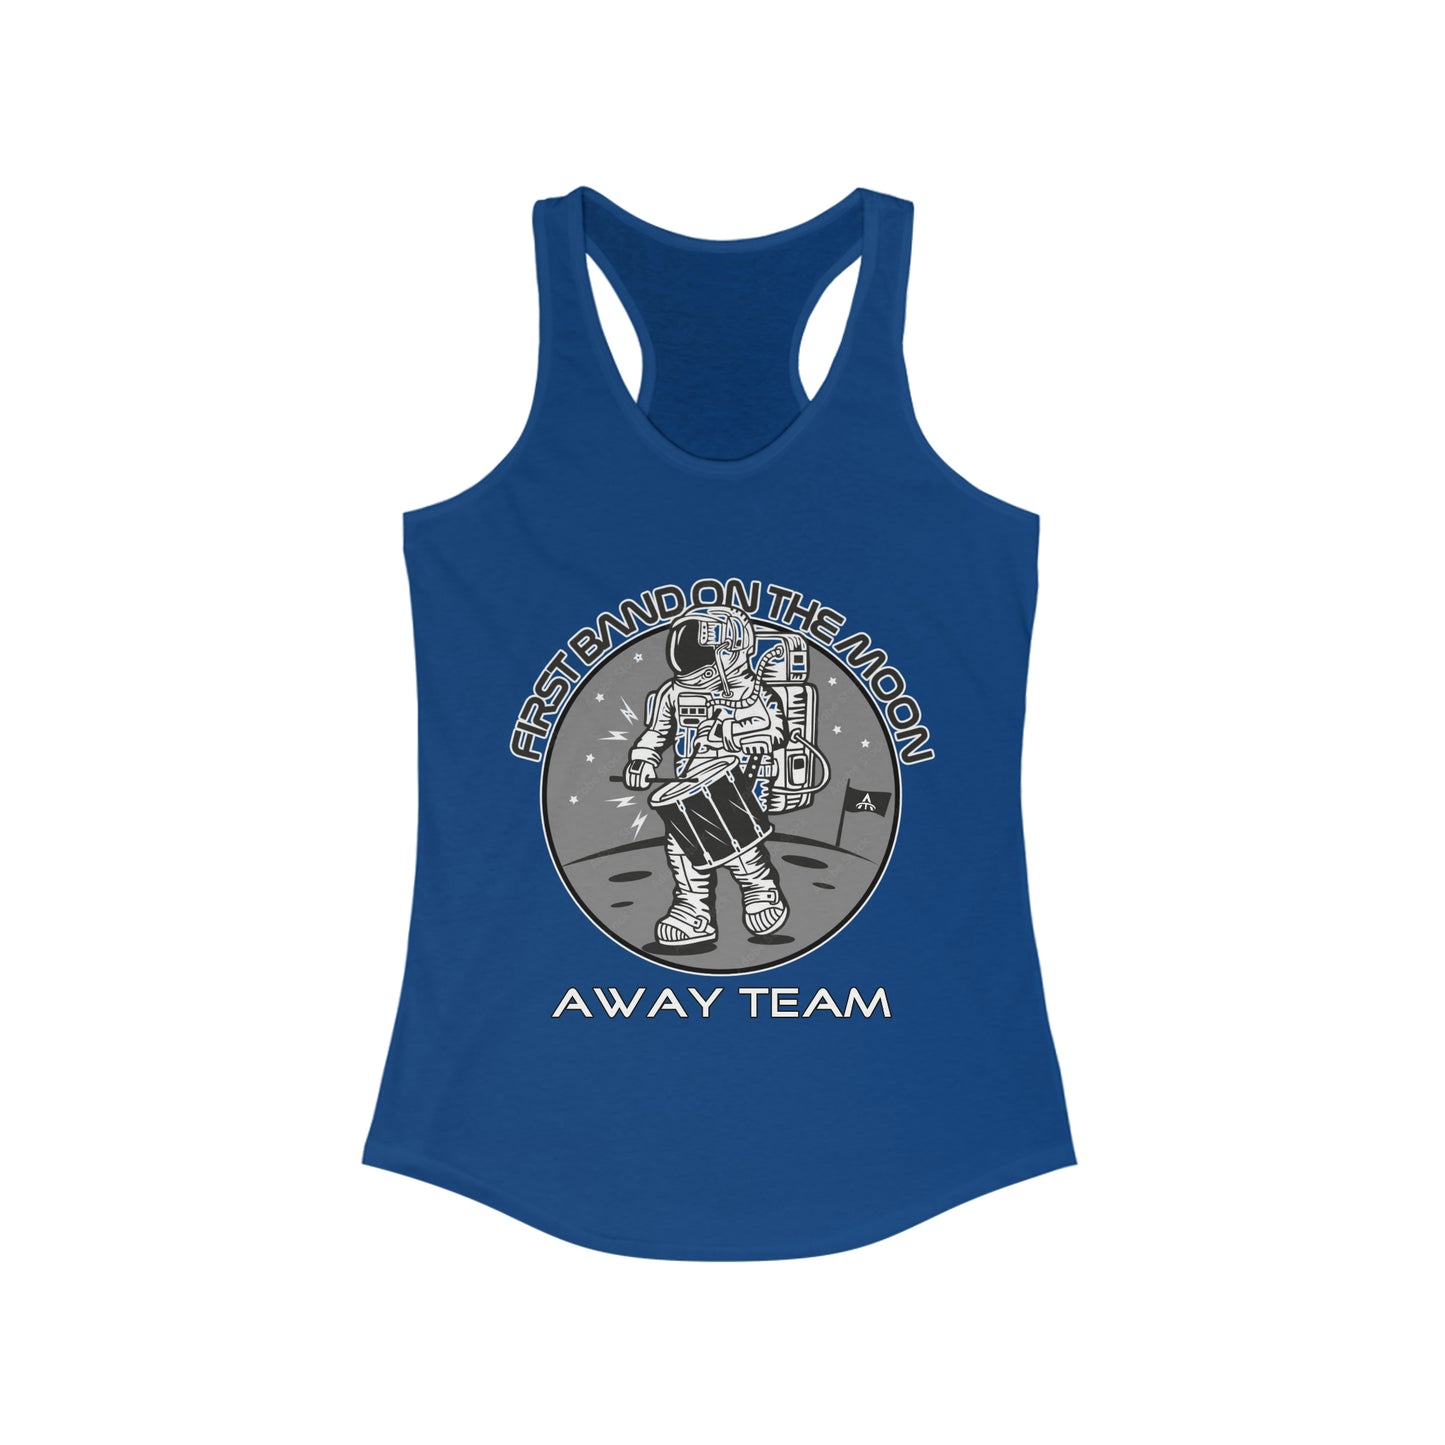 Away Team Band on the Moon Women's Ideal Racerback Tank